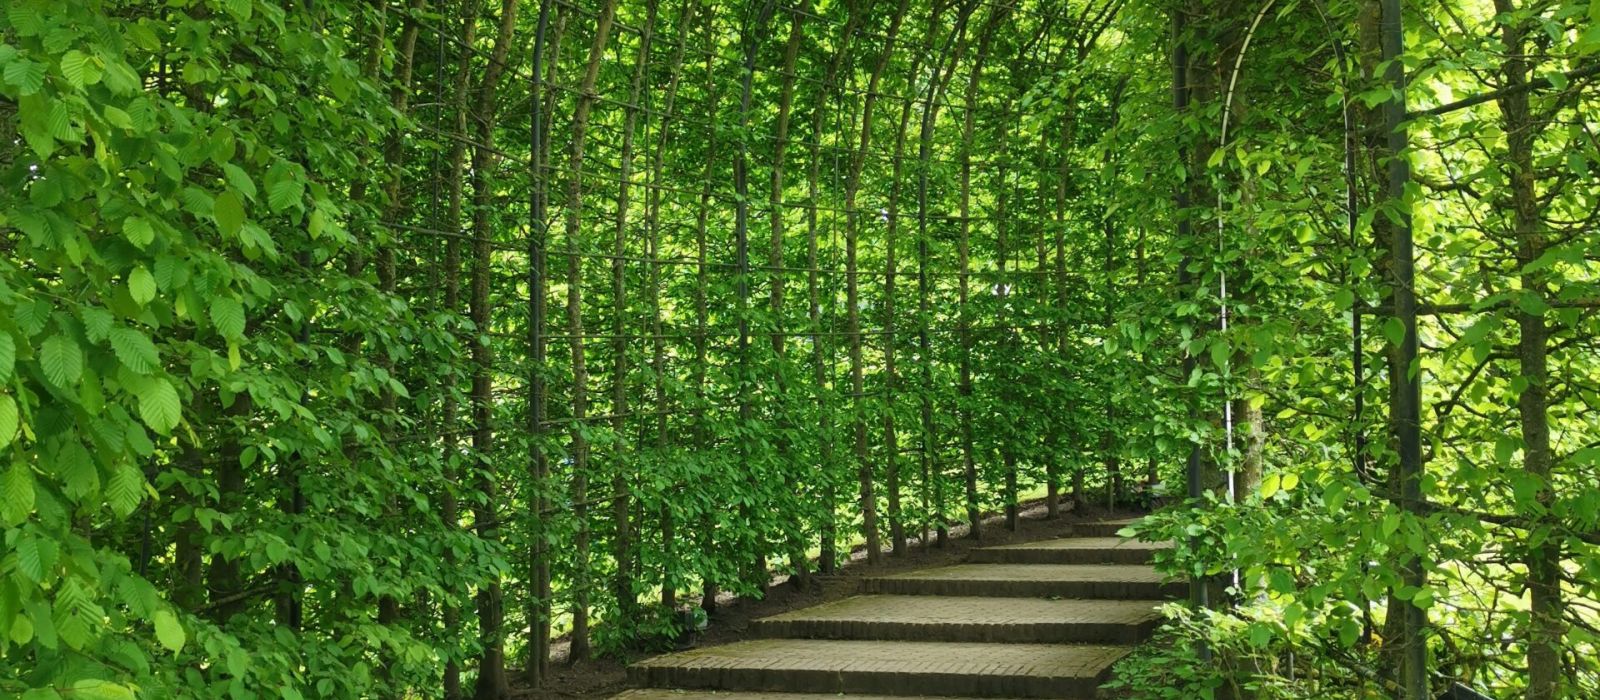 Walkway surrounded by green plants